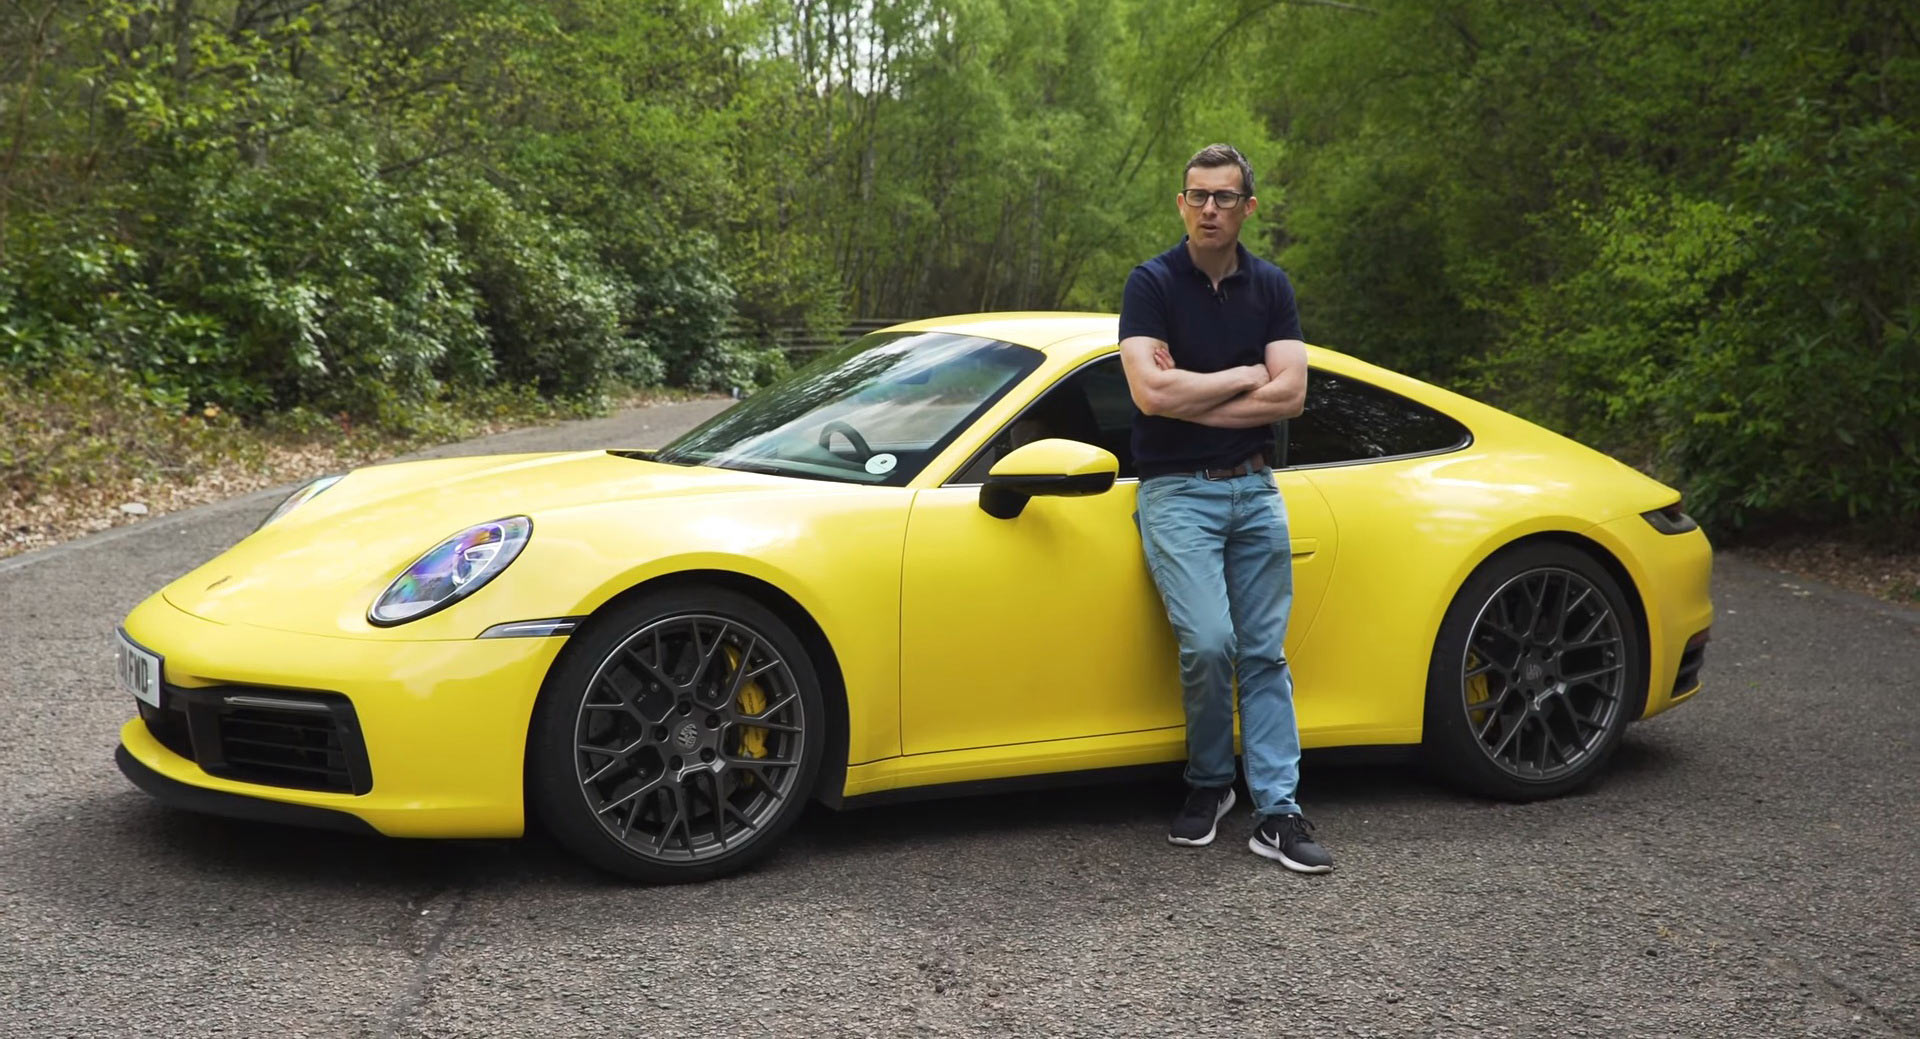 Just How Good Is The New Porsche 911 Carrera 4S? Well, What Do You Think? |  Carscoops